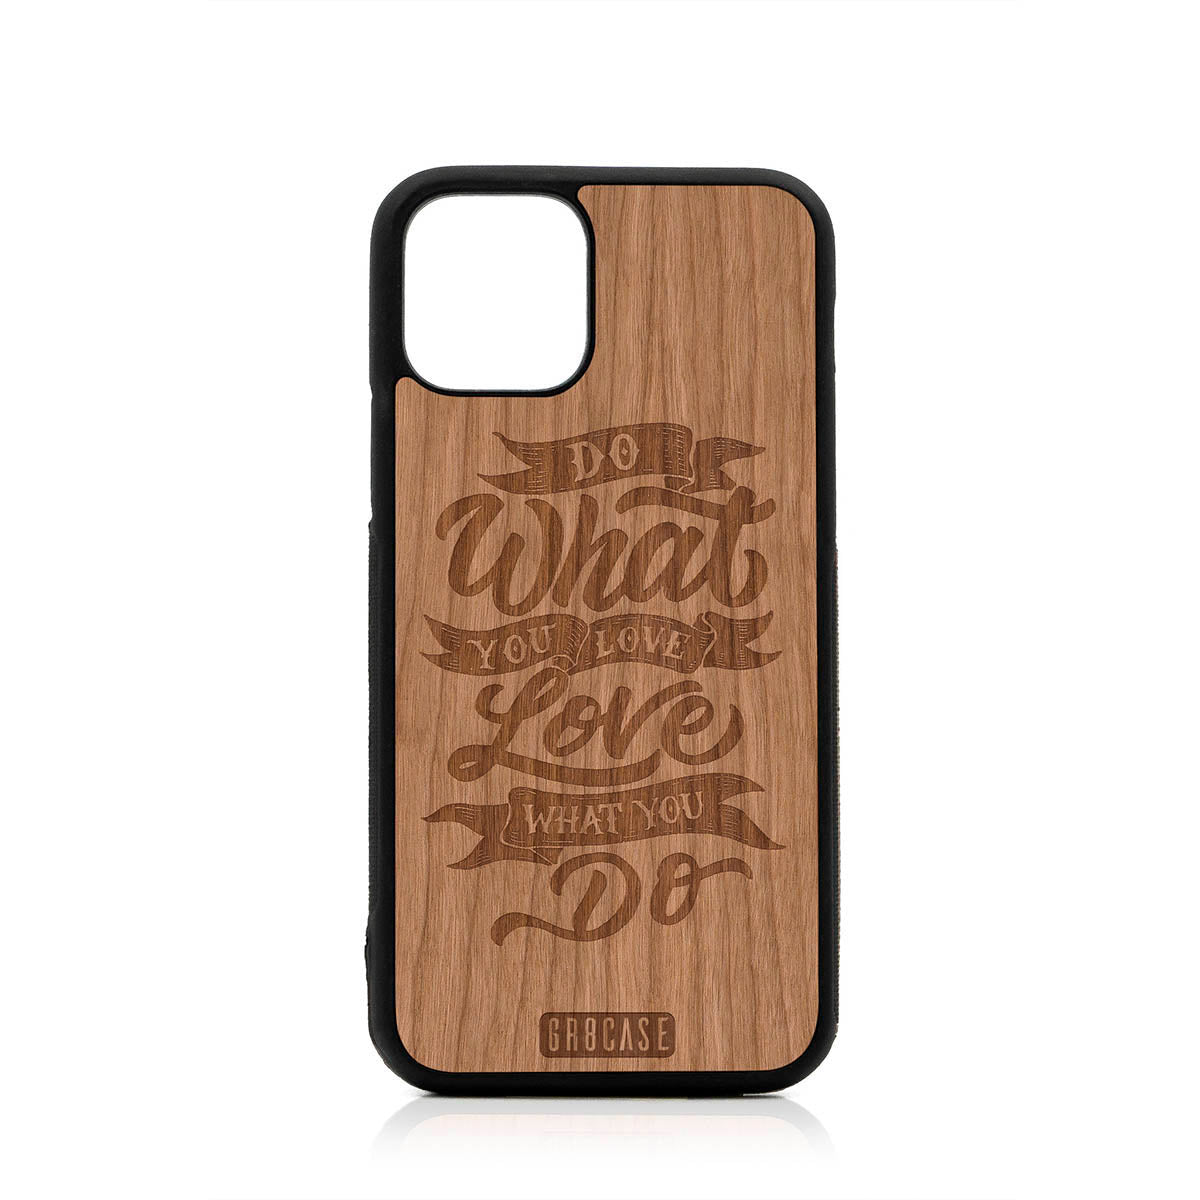 Do What You Love Love What You Do Design Wood Case For iPhone 11 Pro by GR8CASE